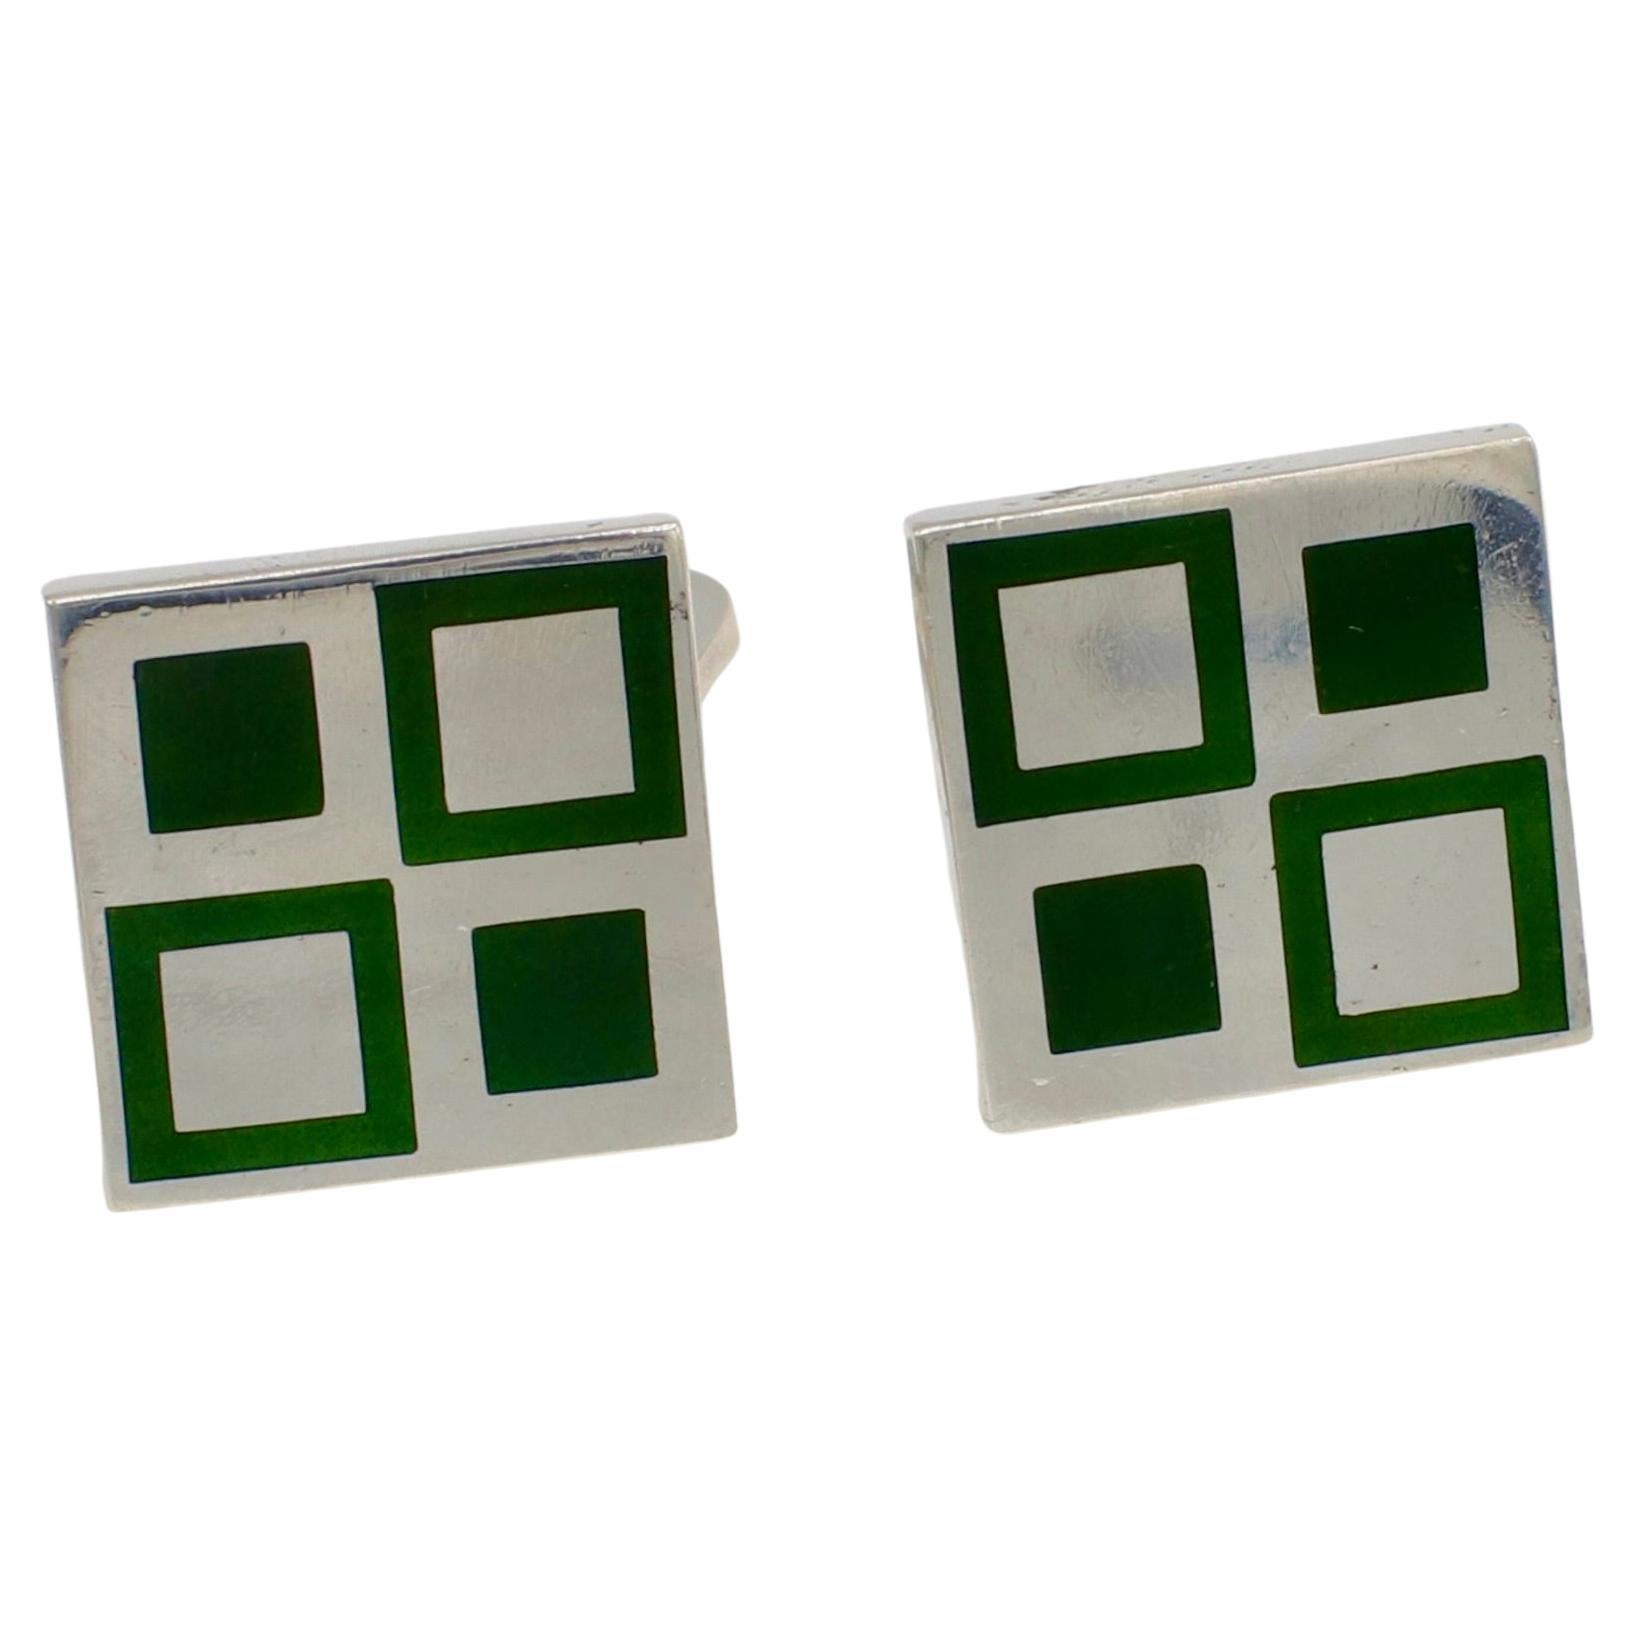 Georg Jensen Sterling Silver Green Stone Square Cufflinks 
Metal: Sterling silver
Weight: 19.3 grams
Square: 16.3 x 16.3mm
Signed: Georg Jensen Denmark 925 